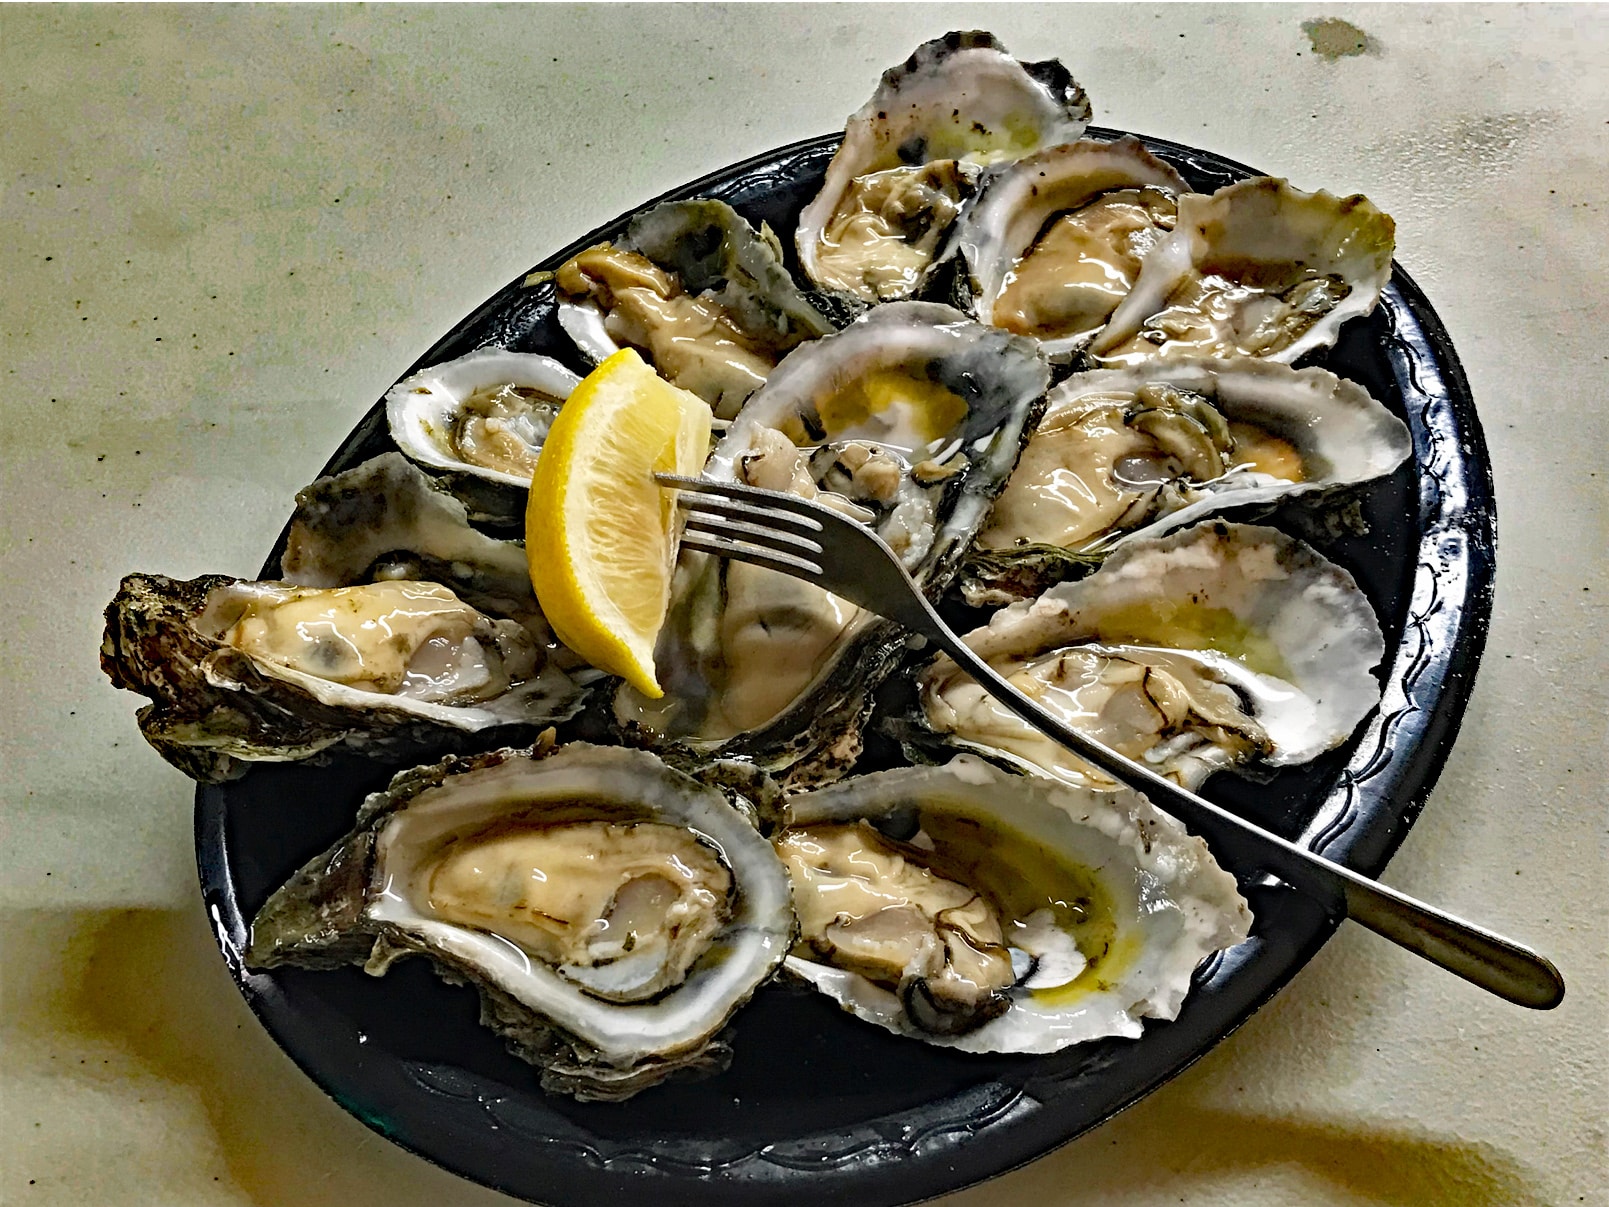 Oysters | Learn More & Find the Best Near You - Roadfood